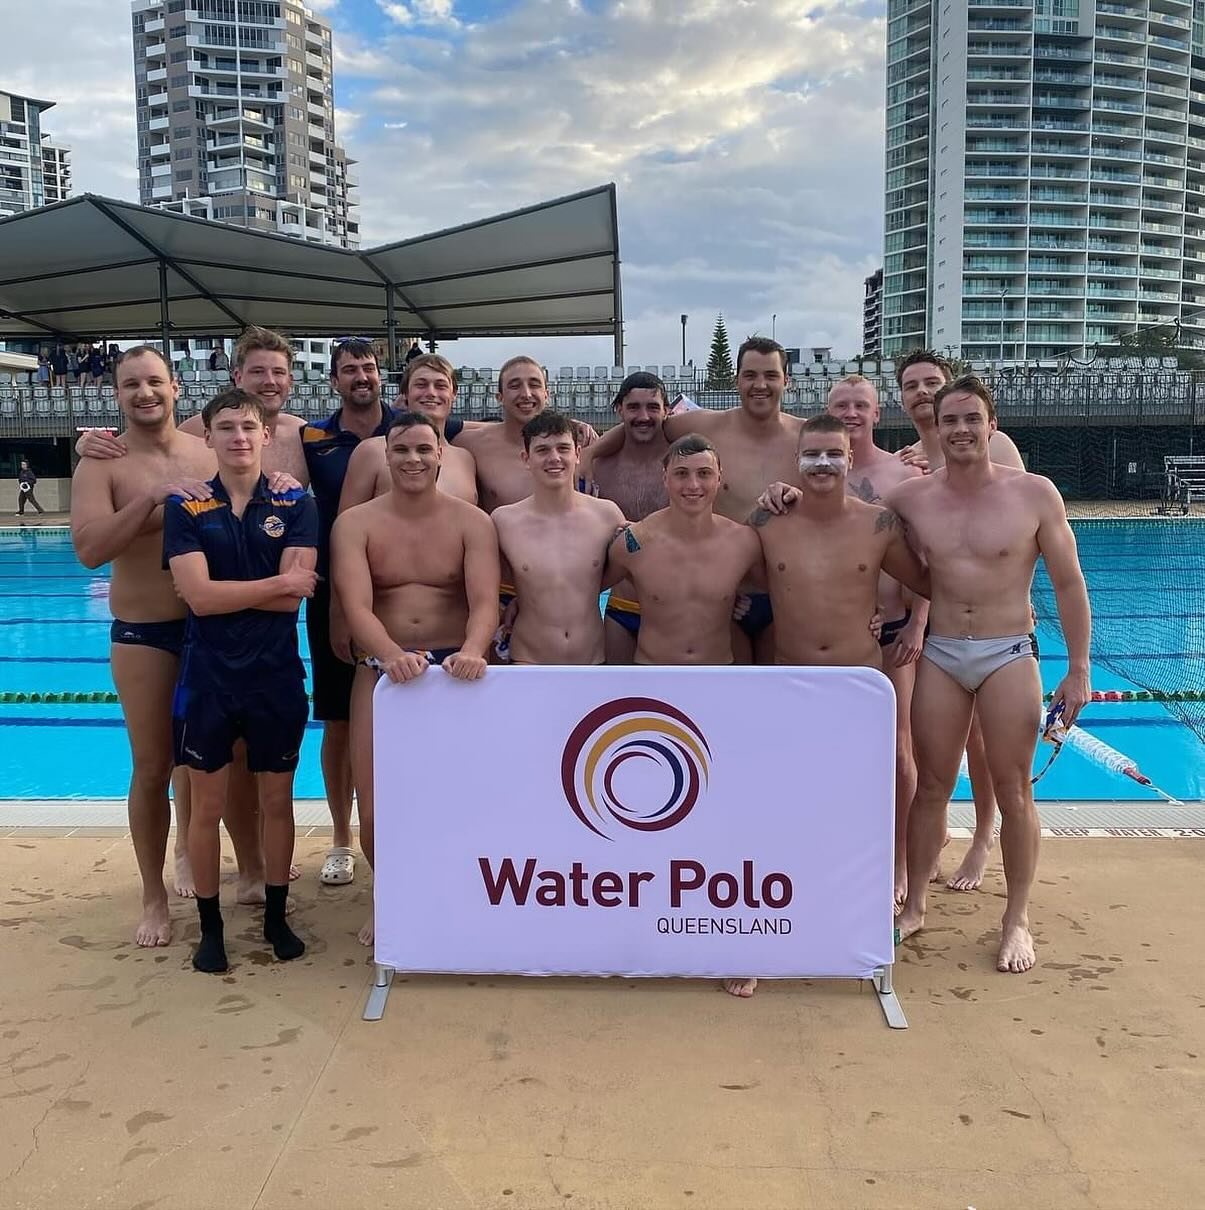 Congratulations to our ACT Senior Men and Women who completed a successful Australian Country Championships today on the Gold Coast. 

Our Men took home gold 🥇 while our women took home bronze 🥉

Thanks to @canberrakrakenwp for all their efforts in